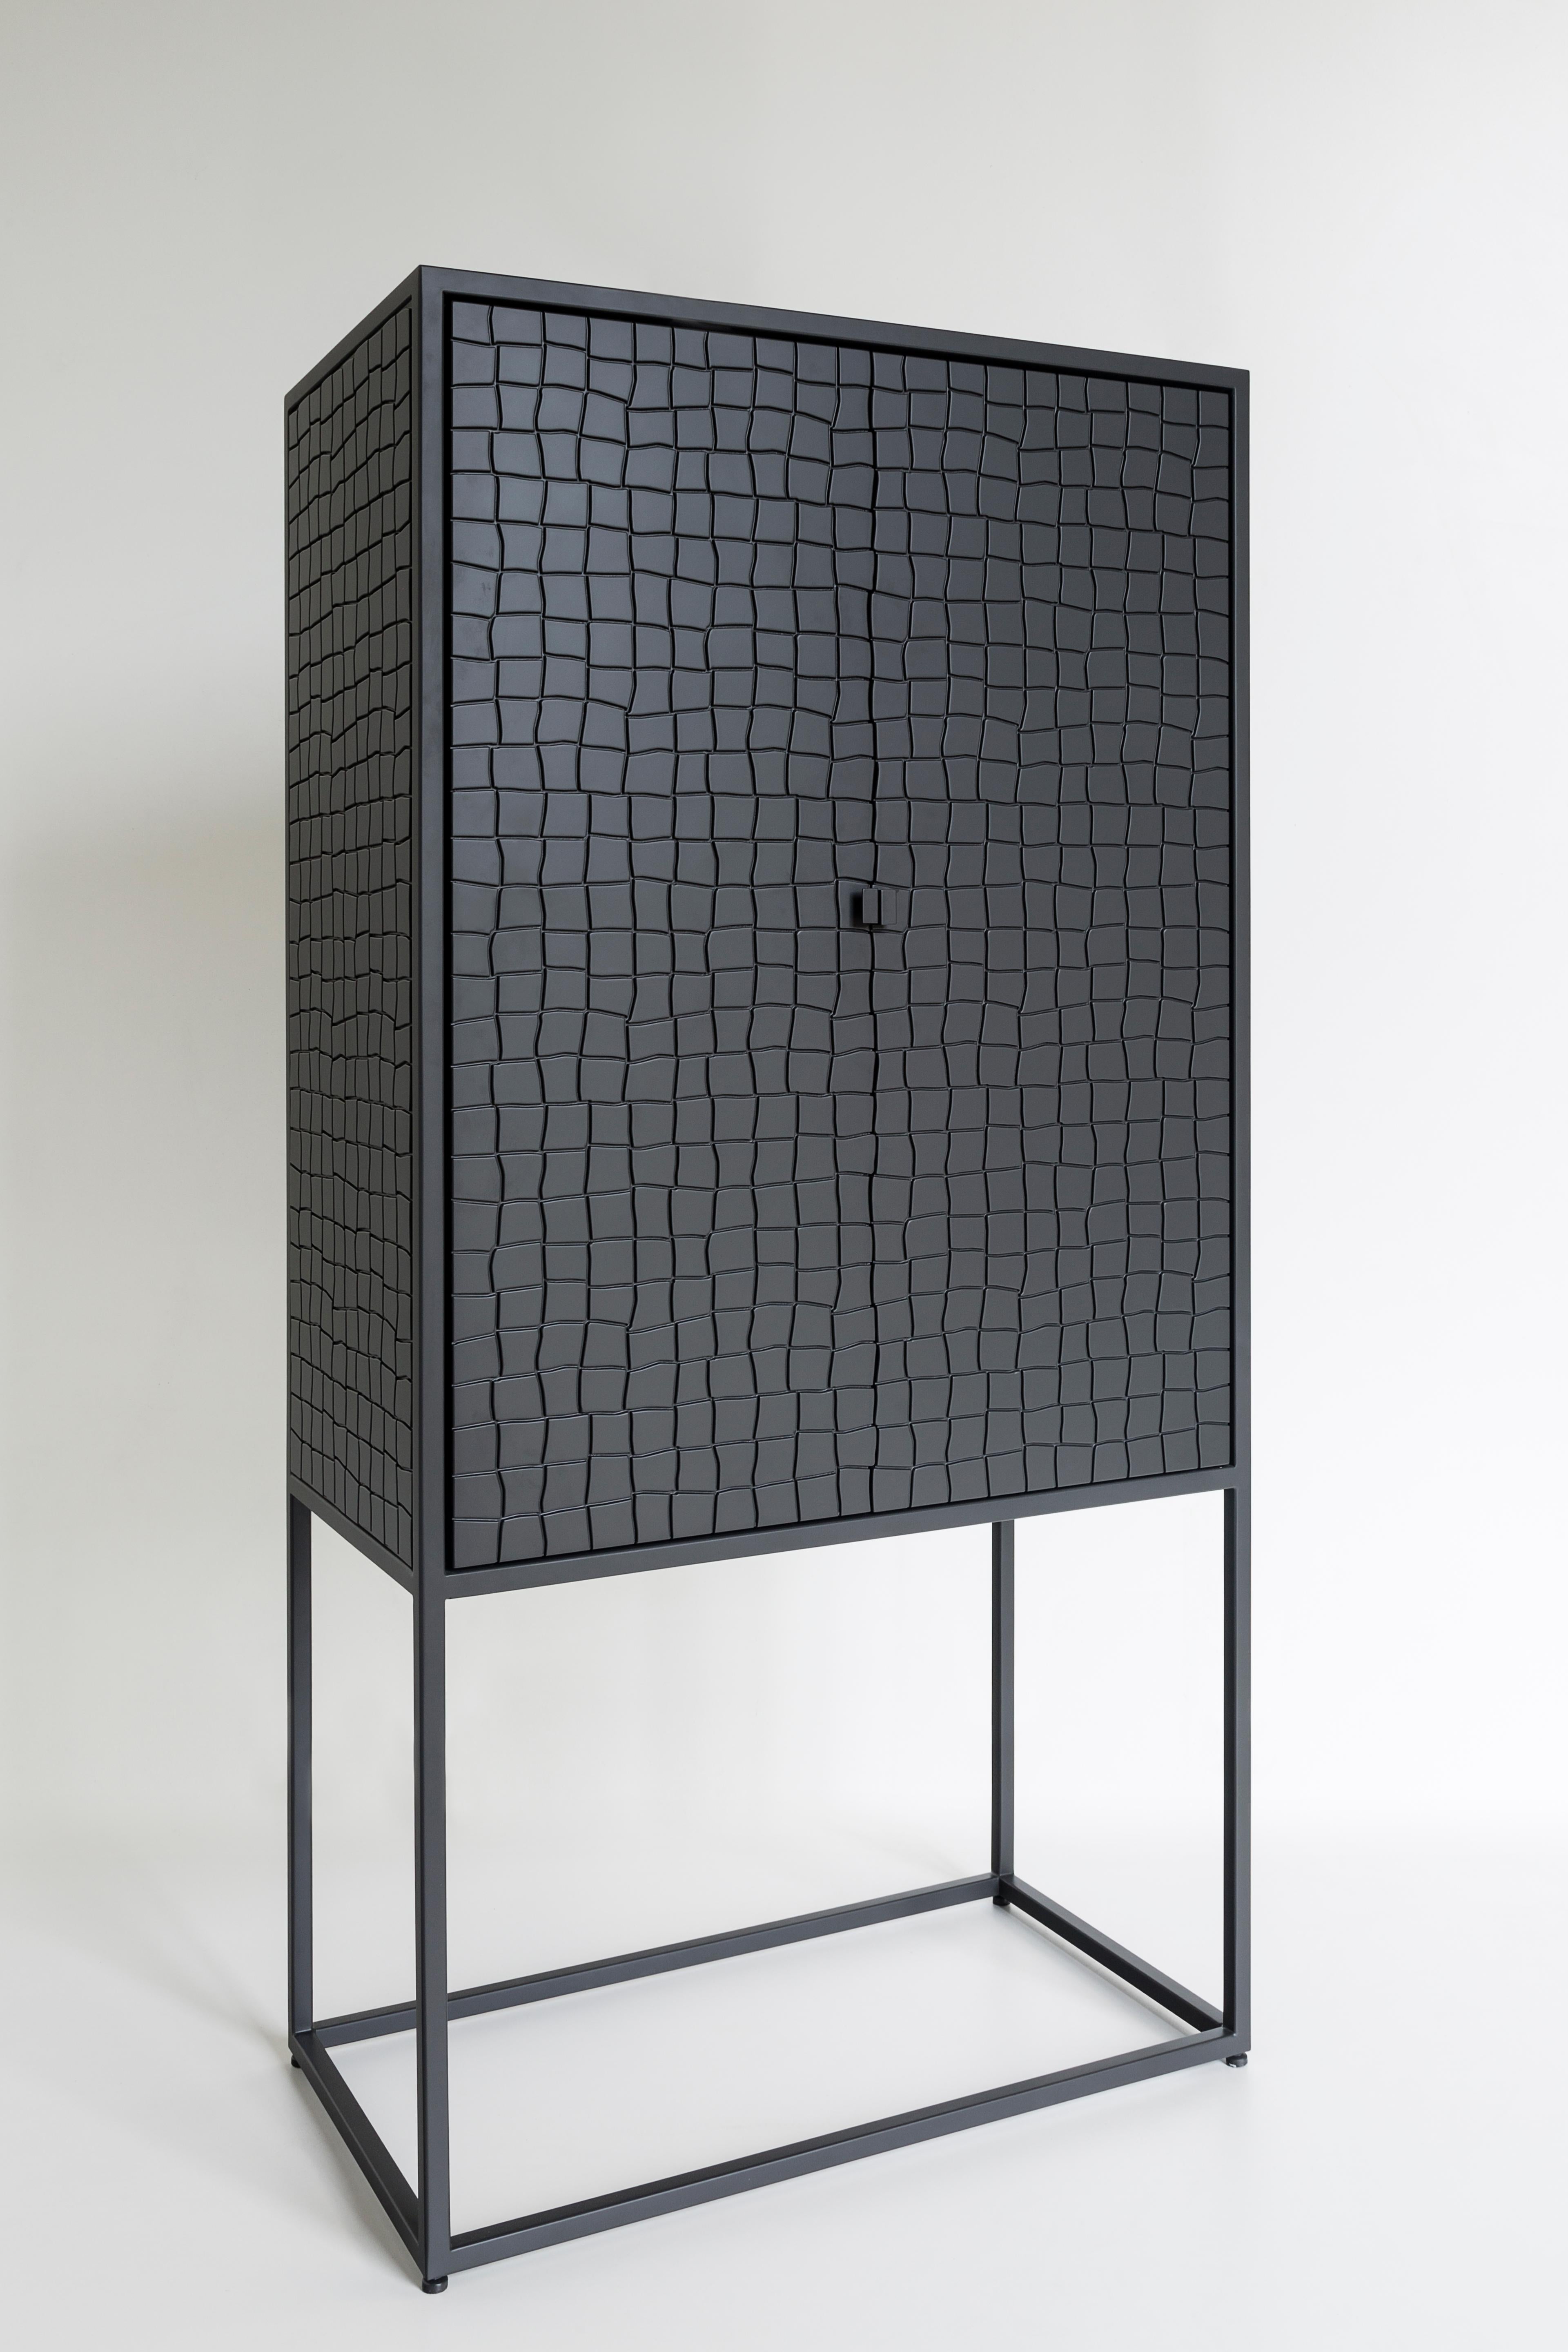 The drinks cabinet created by the award winning designer, Gustavo Martini, was conceived with a reference to 